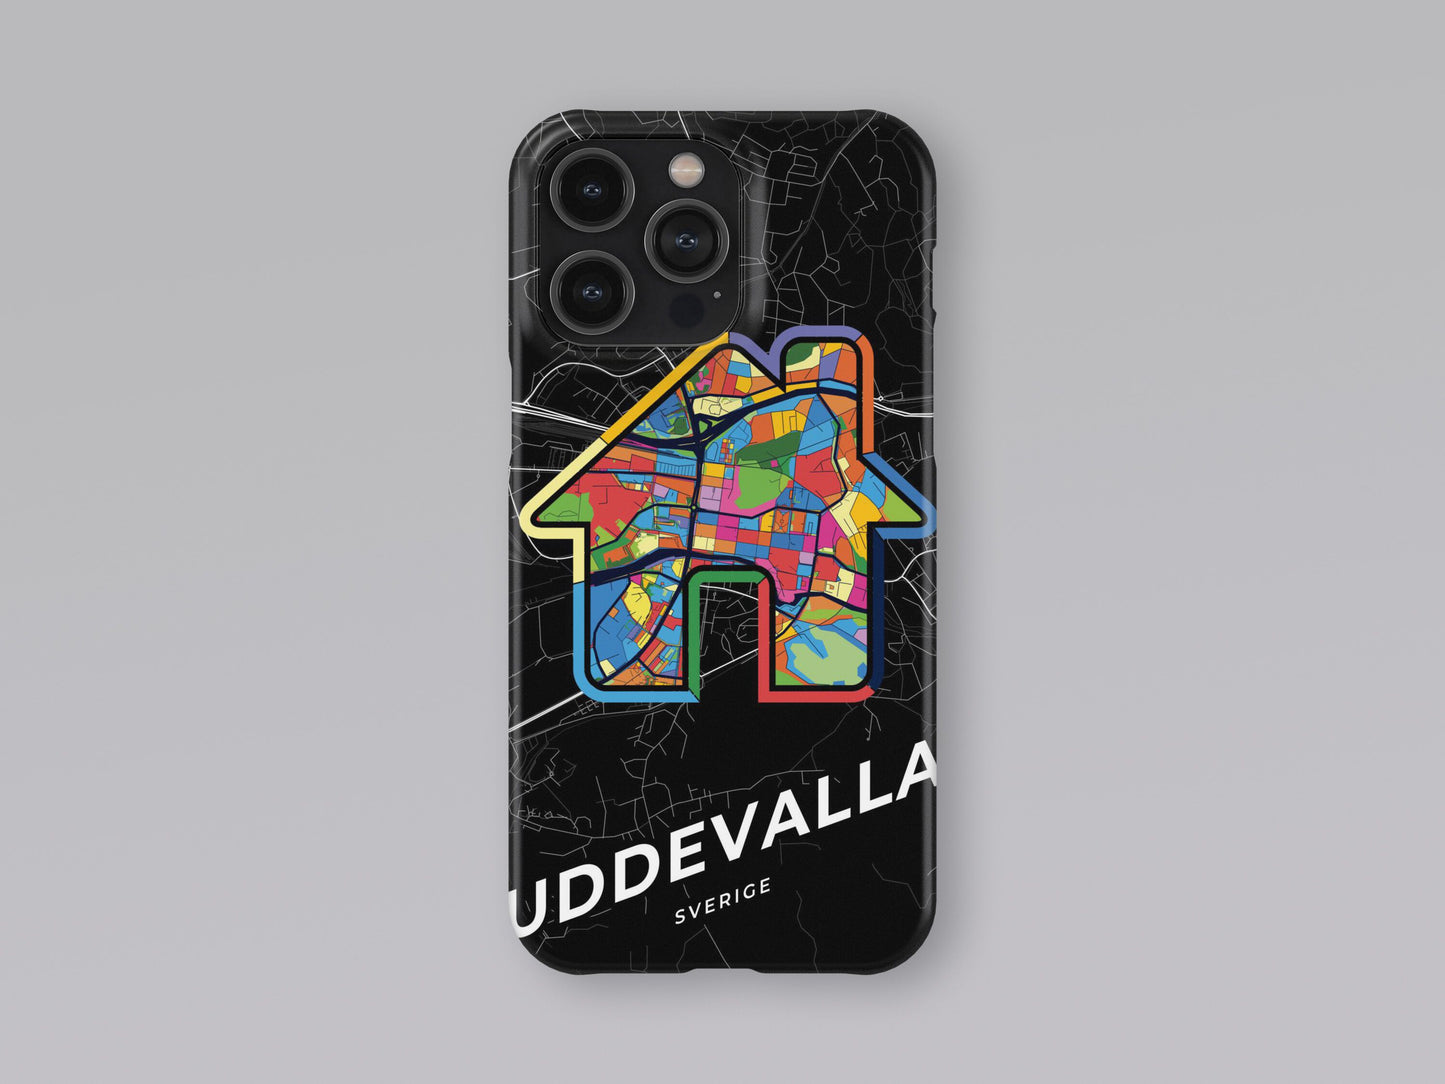 Uddevalla Sweden slim phone case with colorful icon. Birthday, wedding or housewarming gift. Couple match cases. 3